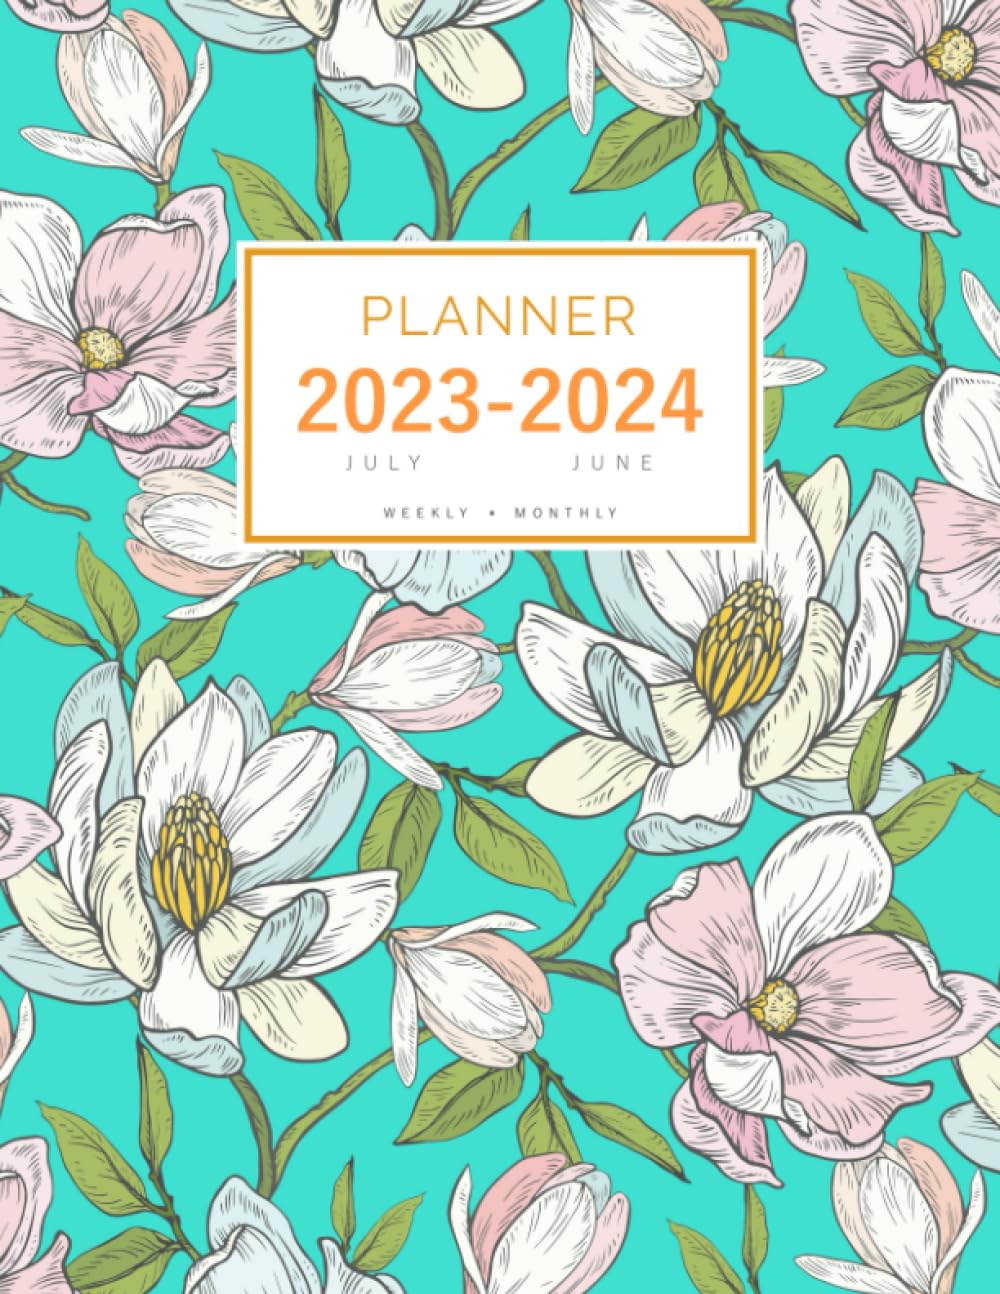 Planner July 2023-2024 June: 8.5 x 11 Weekly and Monthly Organizer | Magnolia Flower Garden Design Turquoise